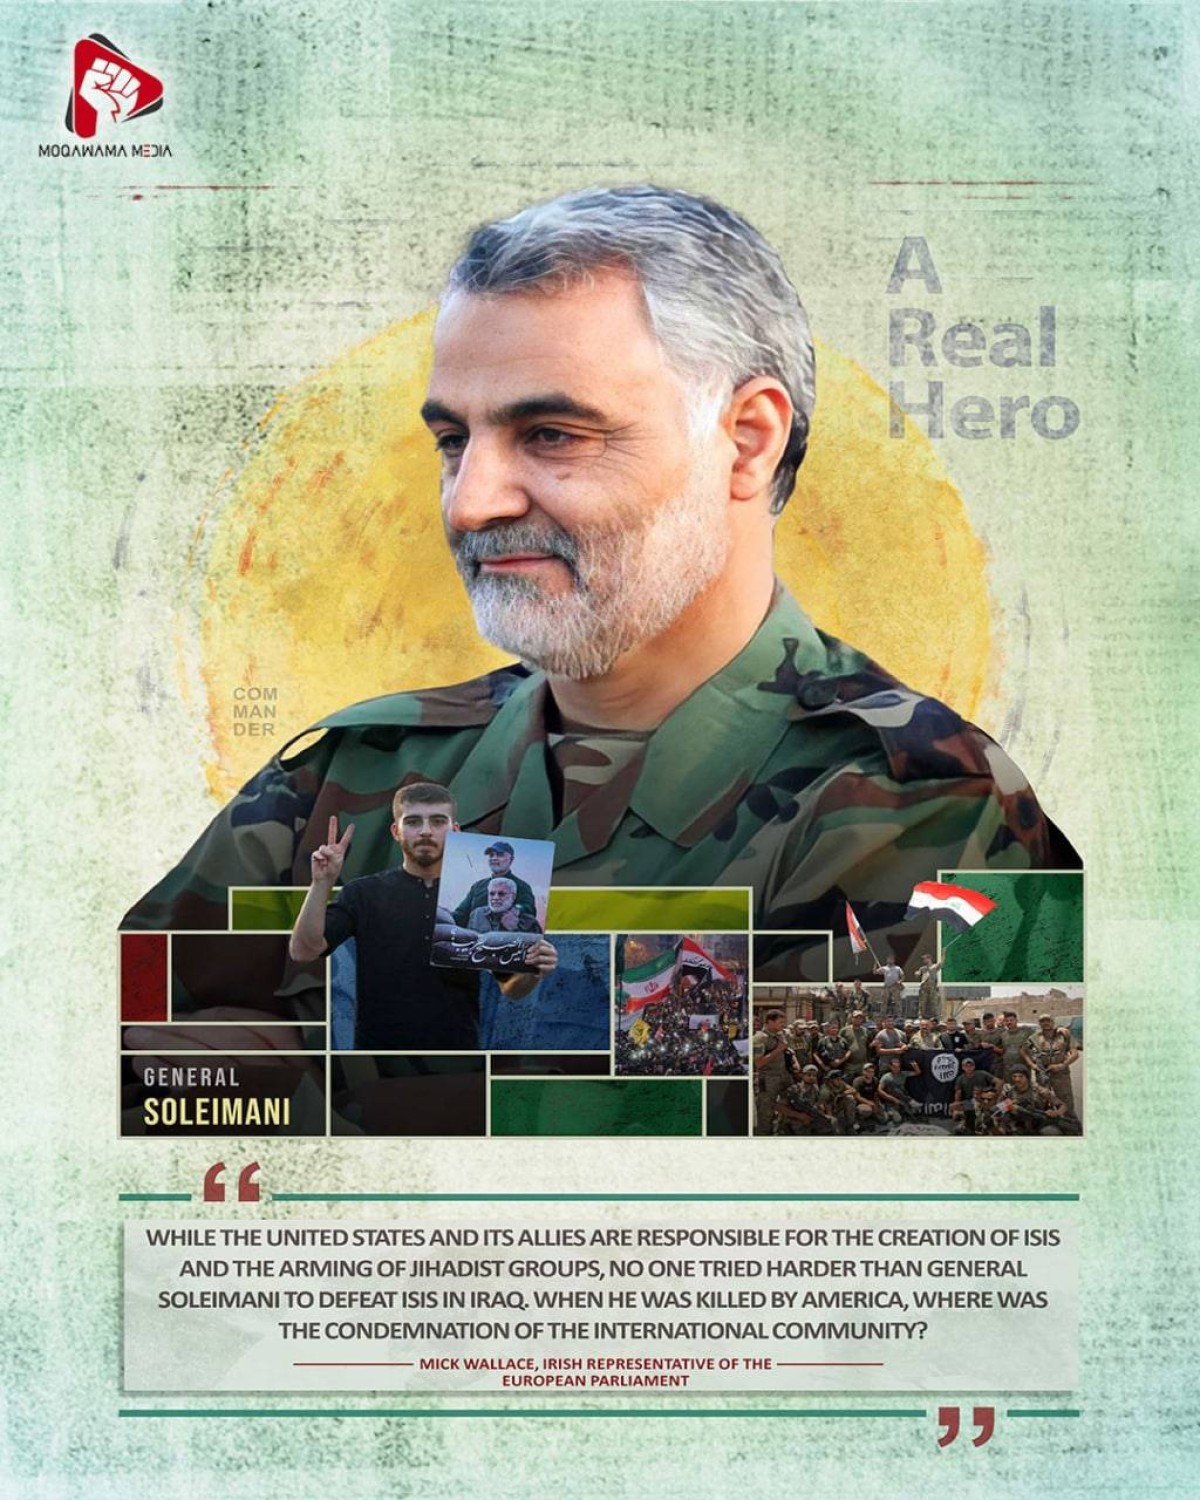   Martyr Soleimani from the Point of View of Western Authorities